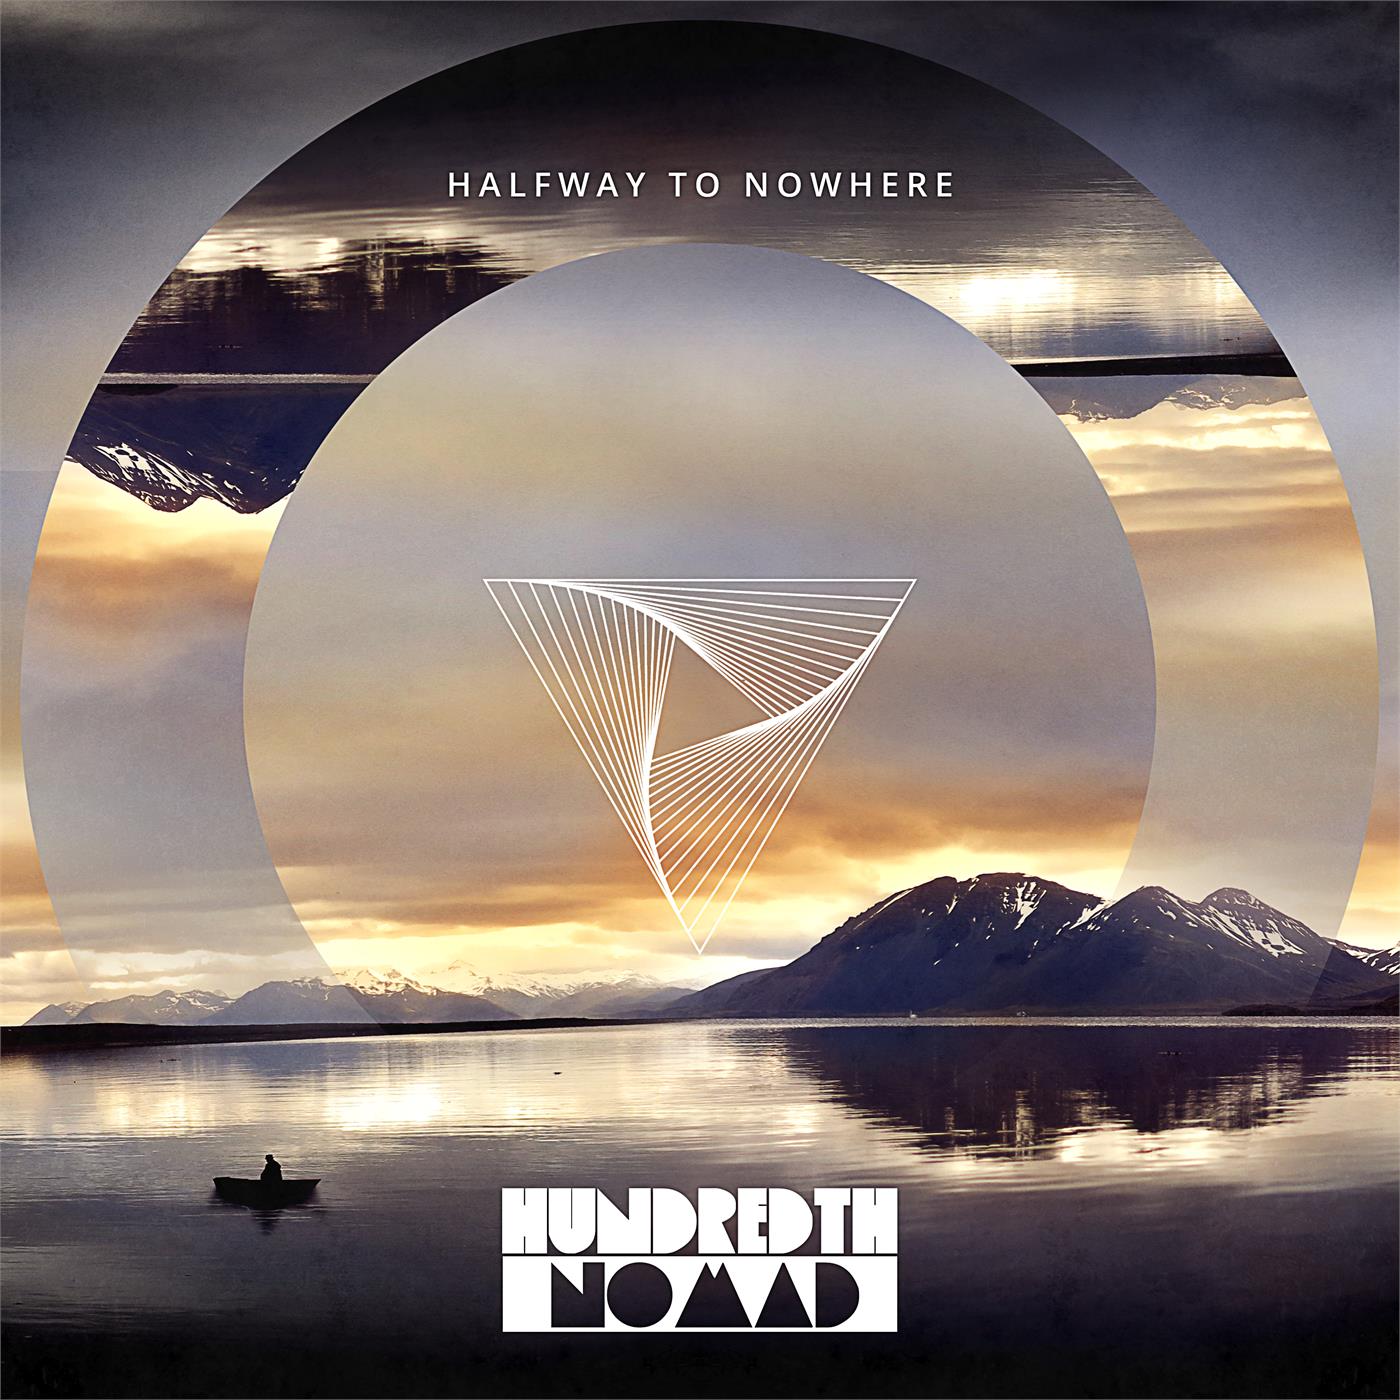 Halfway to Nowhere EP